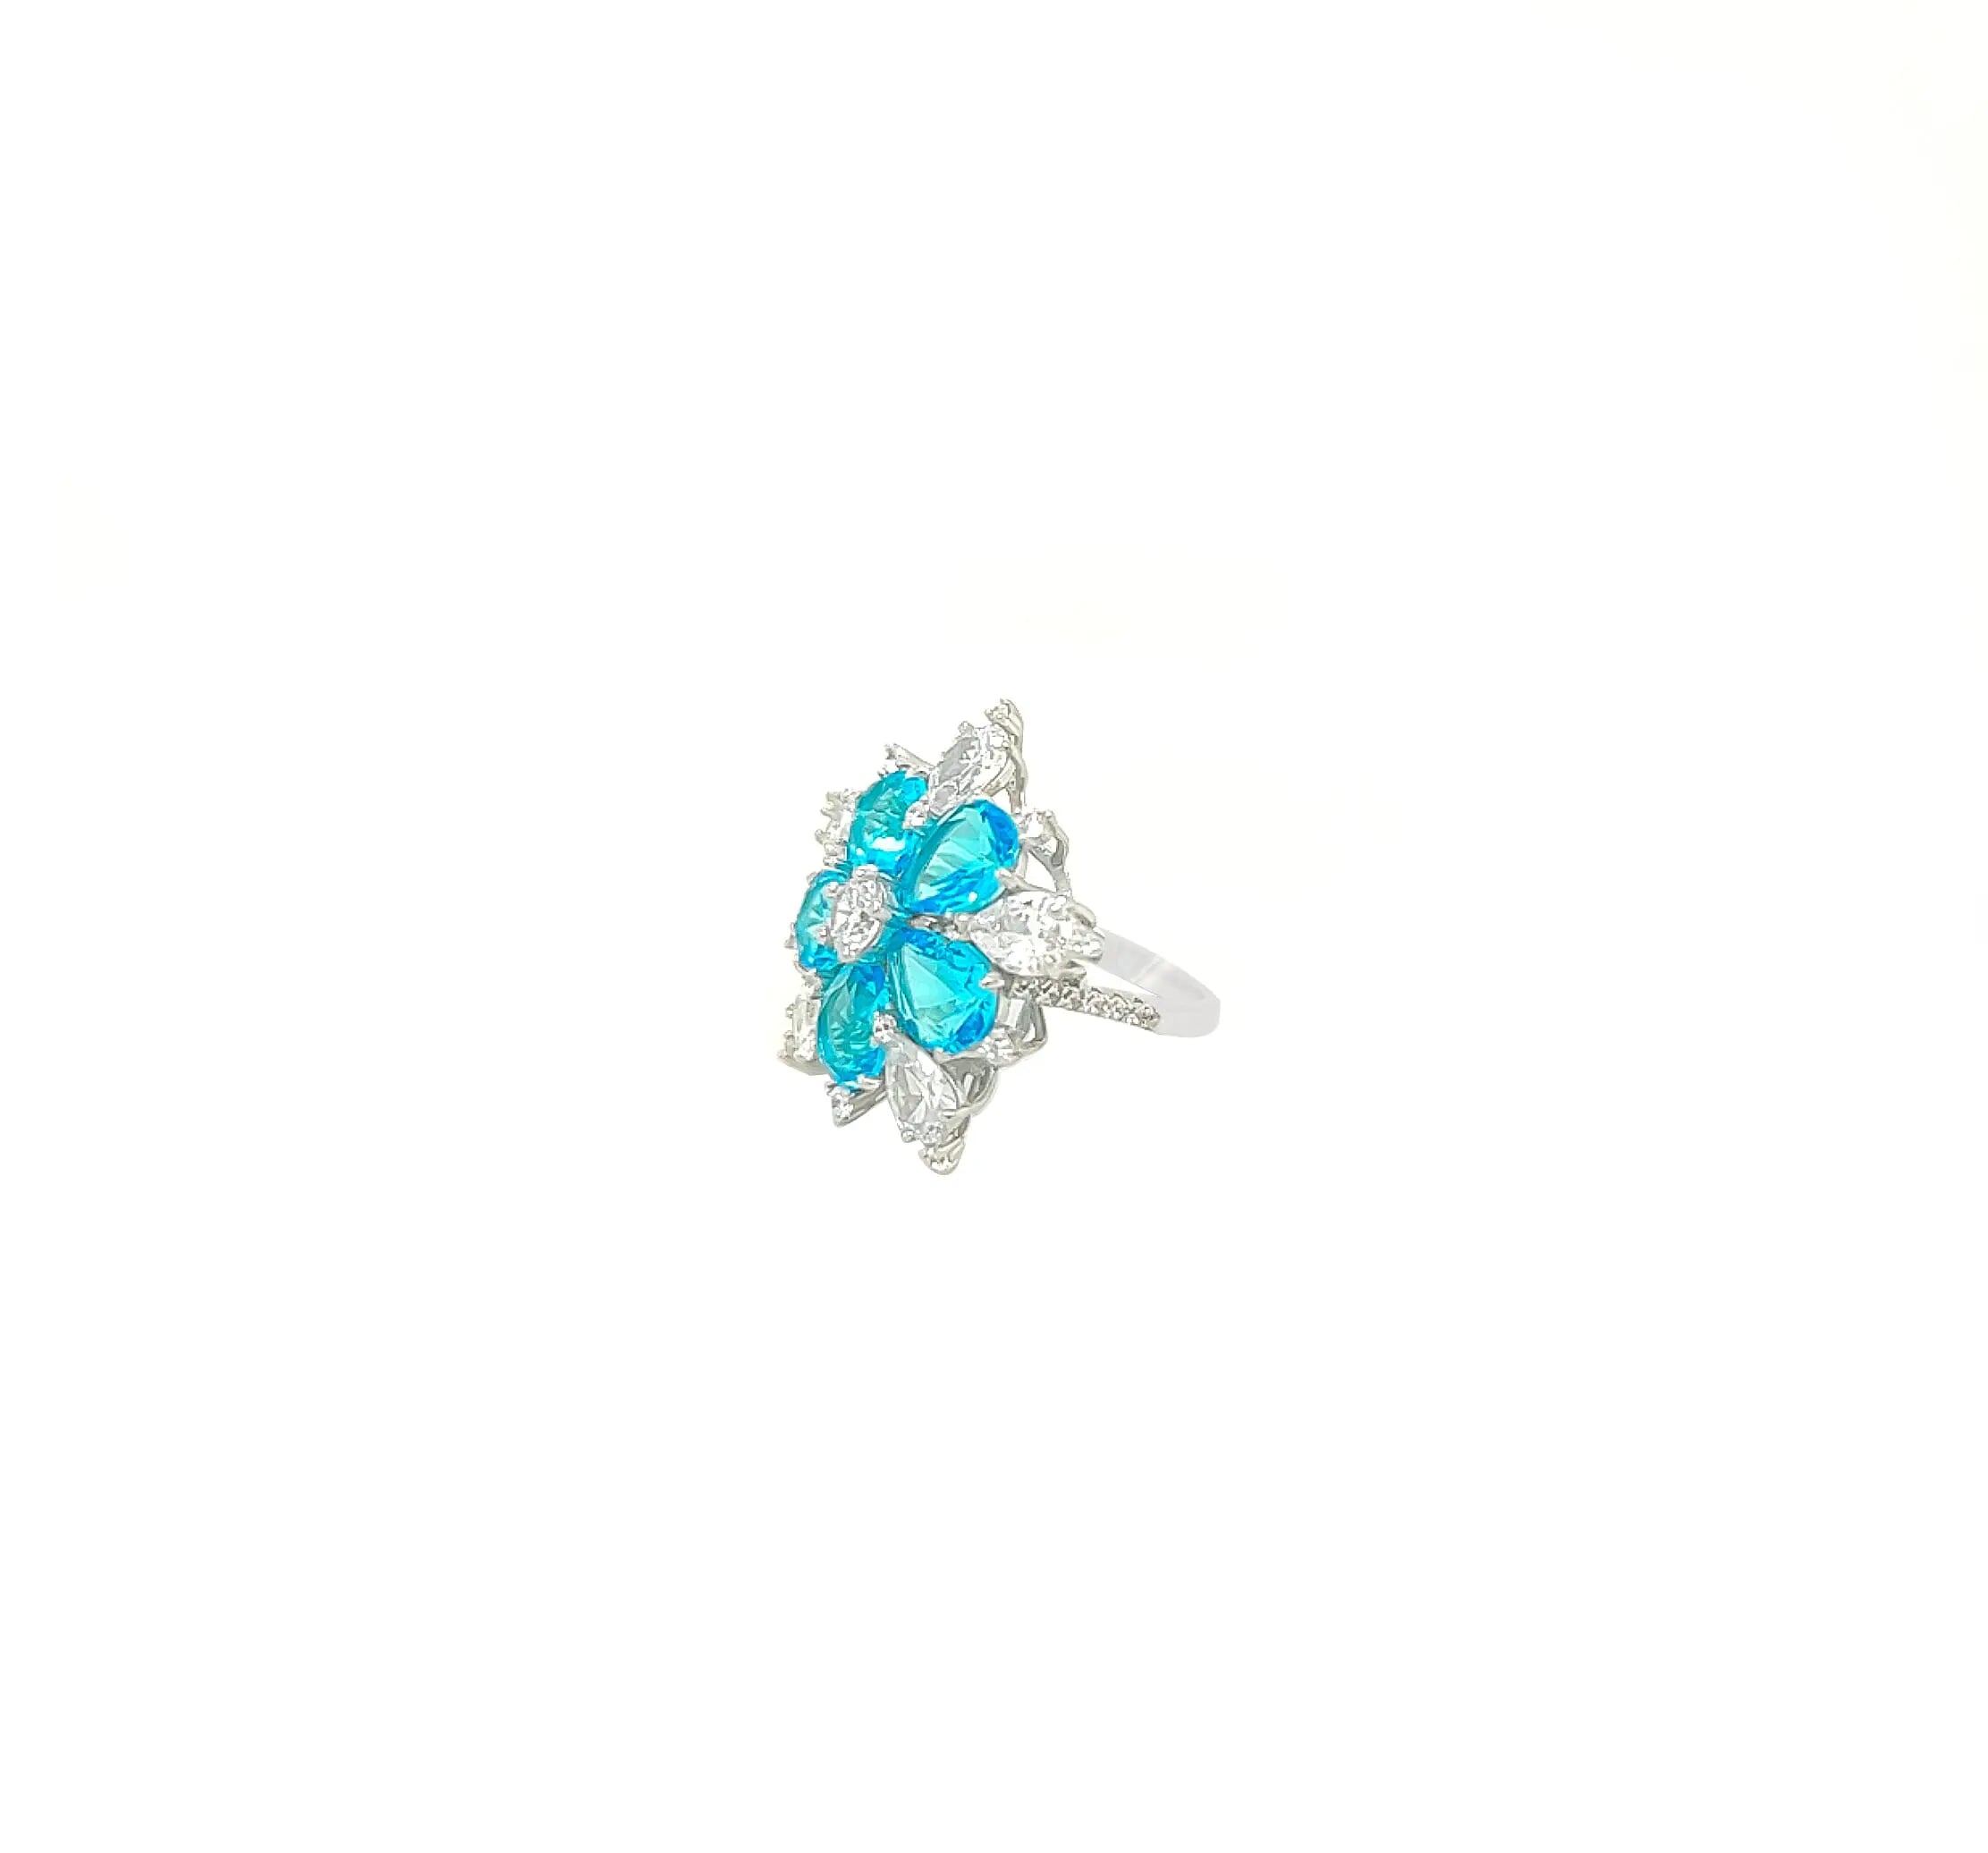 Asfour Crystal 925 Silver Heart Ring With Transparent & Aqua Zircon Lobes - Silver - Size 9